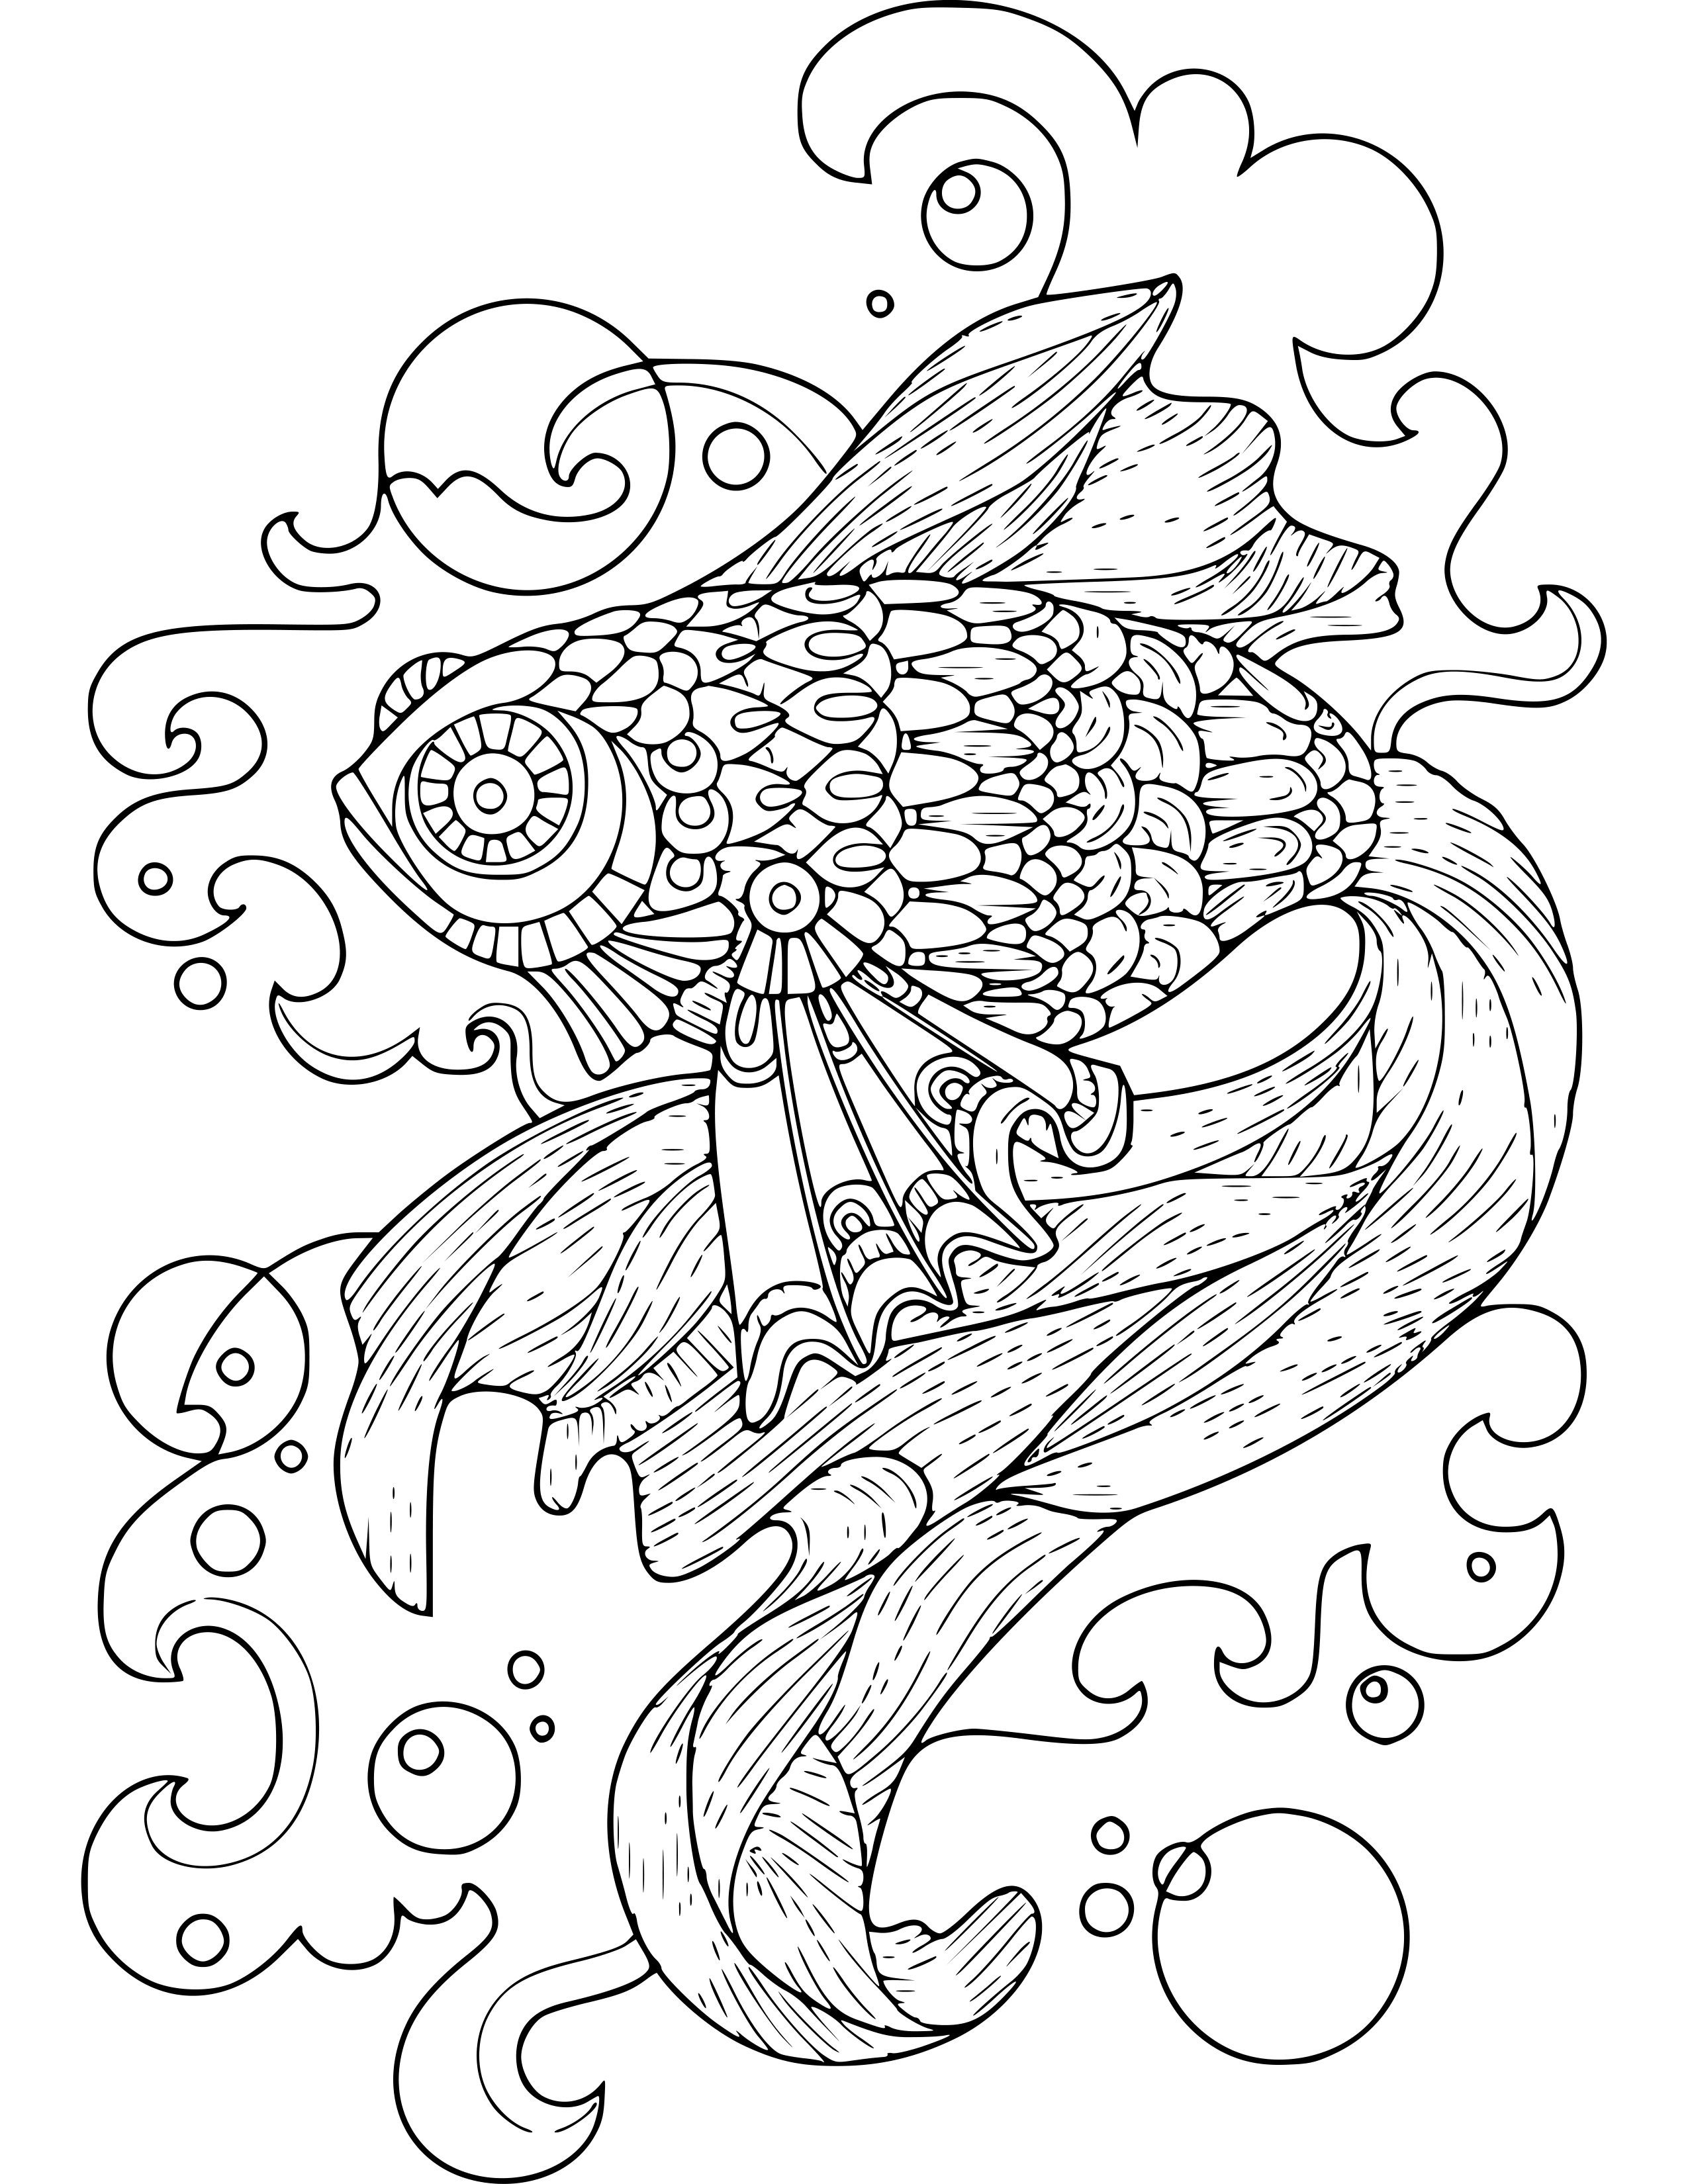 60 Animal Coloring Pages for Adults with Resell Right for $15 - SEOClerks